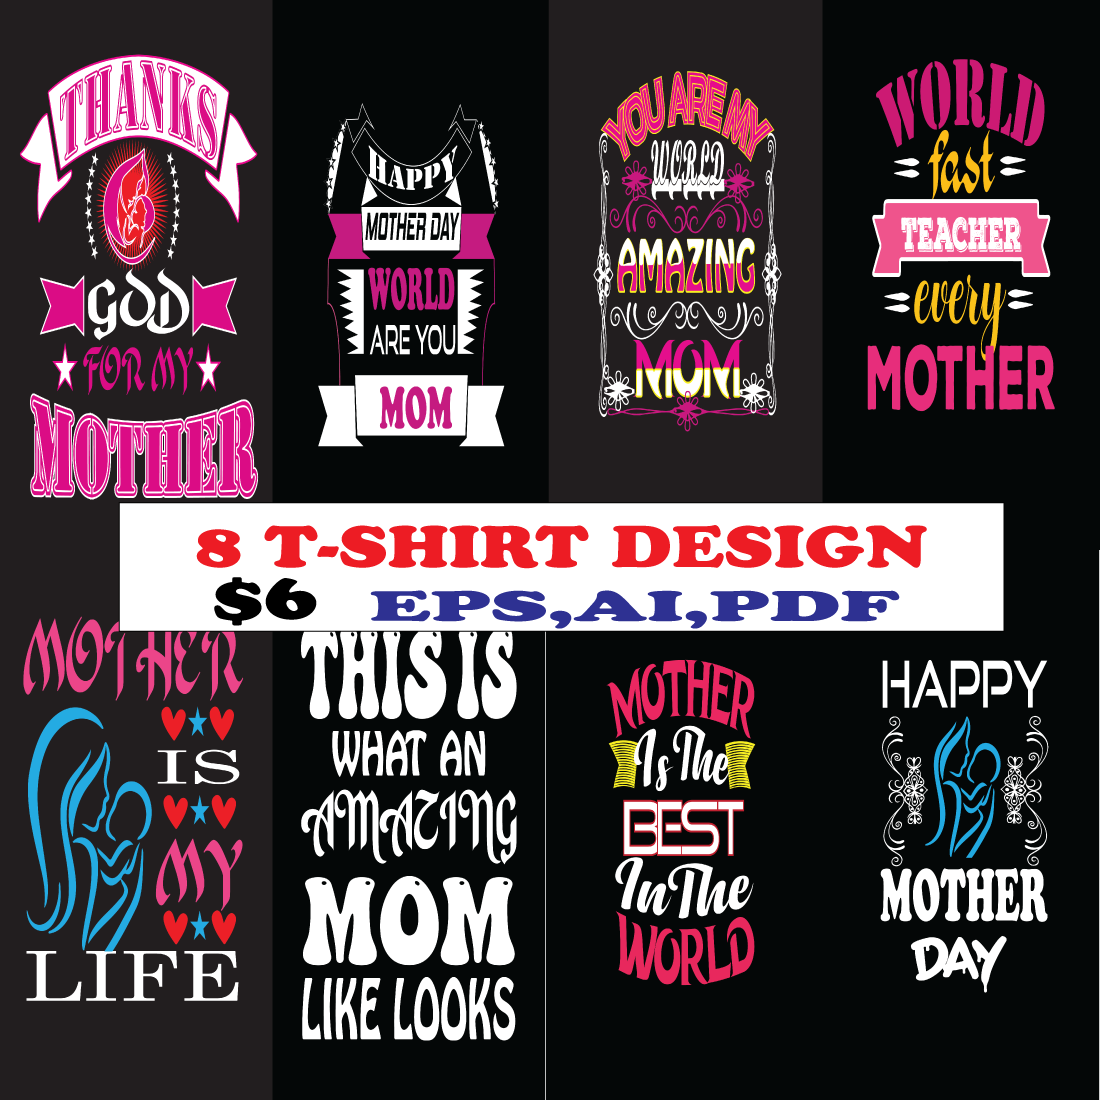 Mother day T-shirt design cover image.